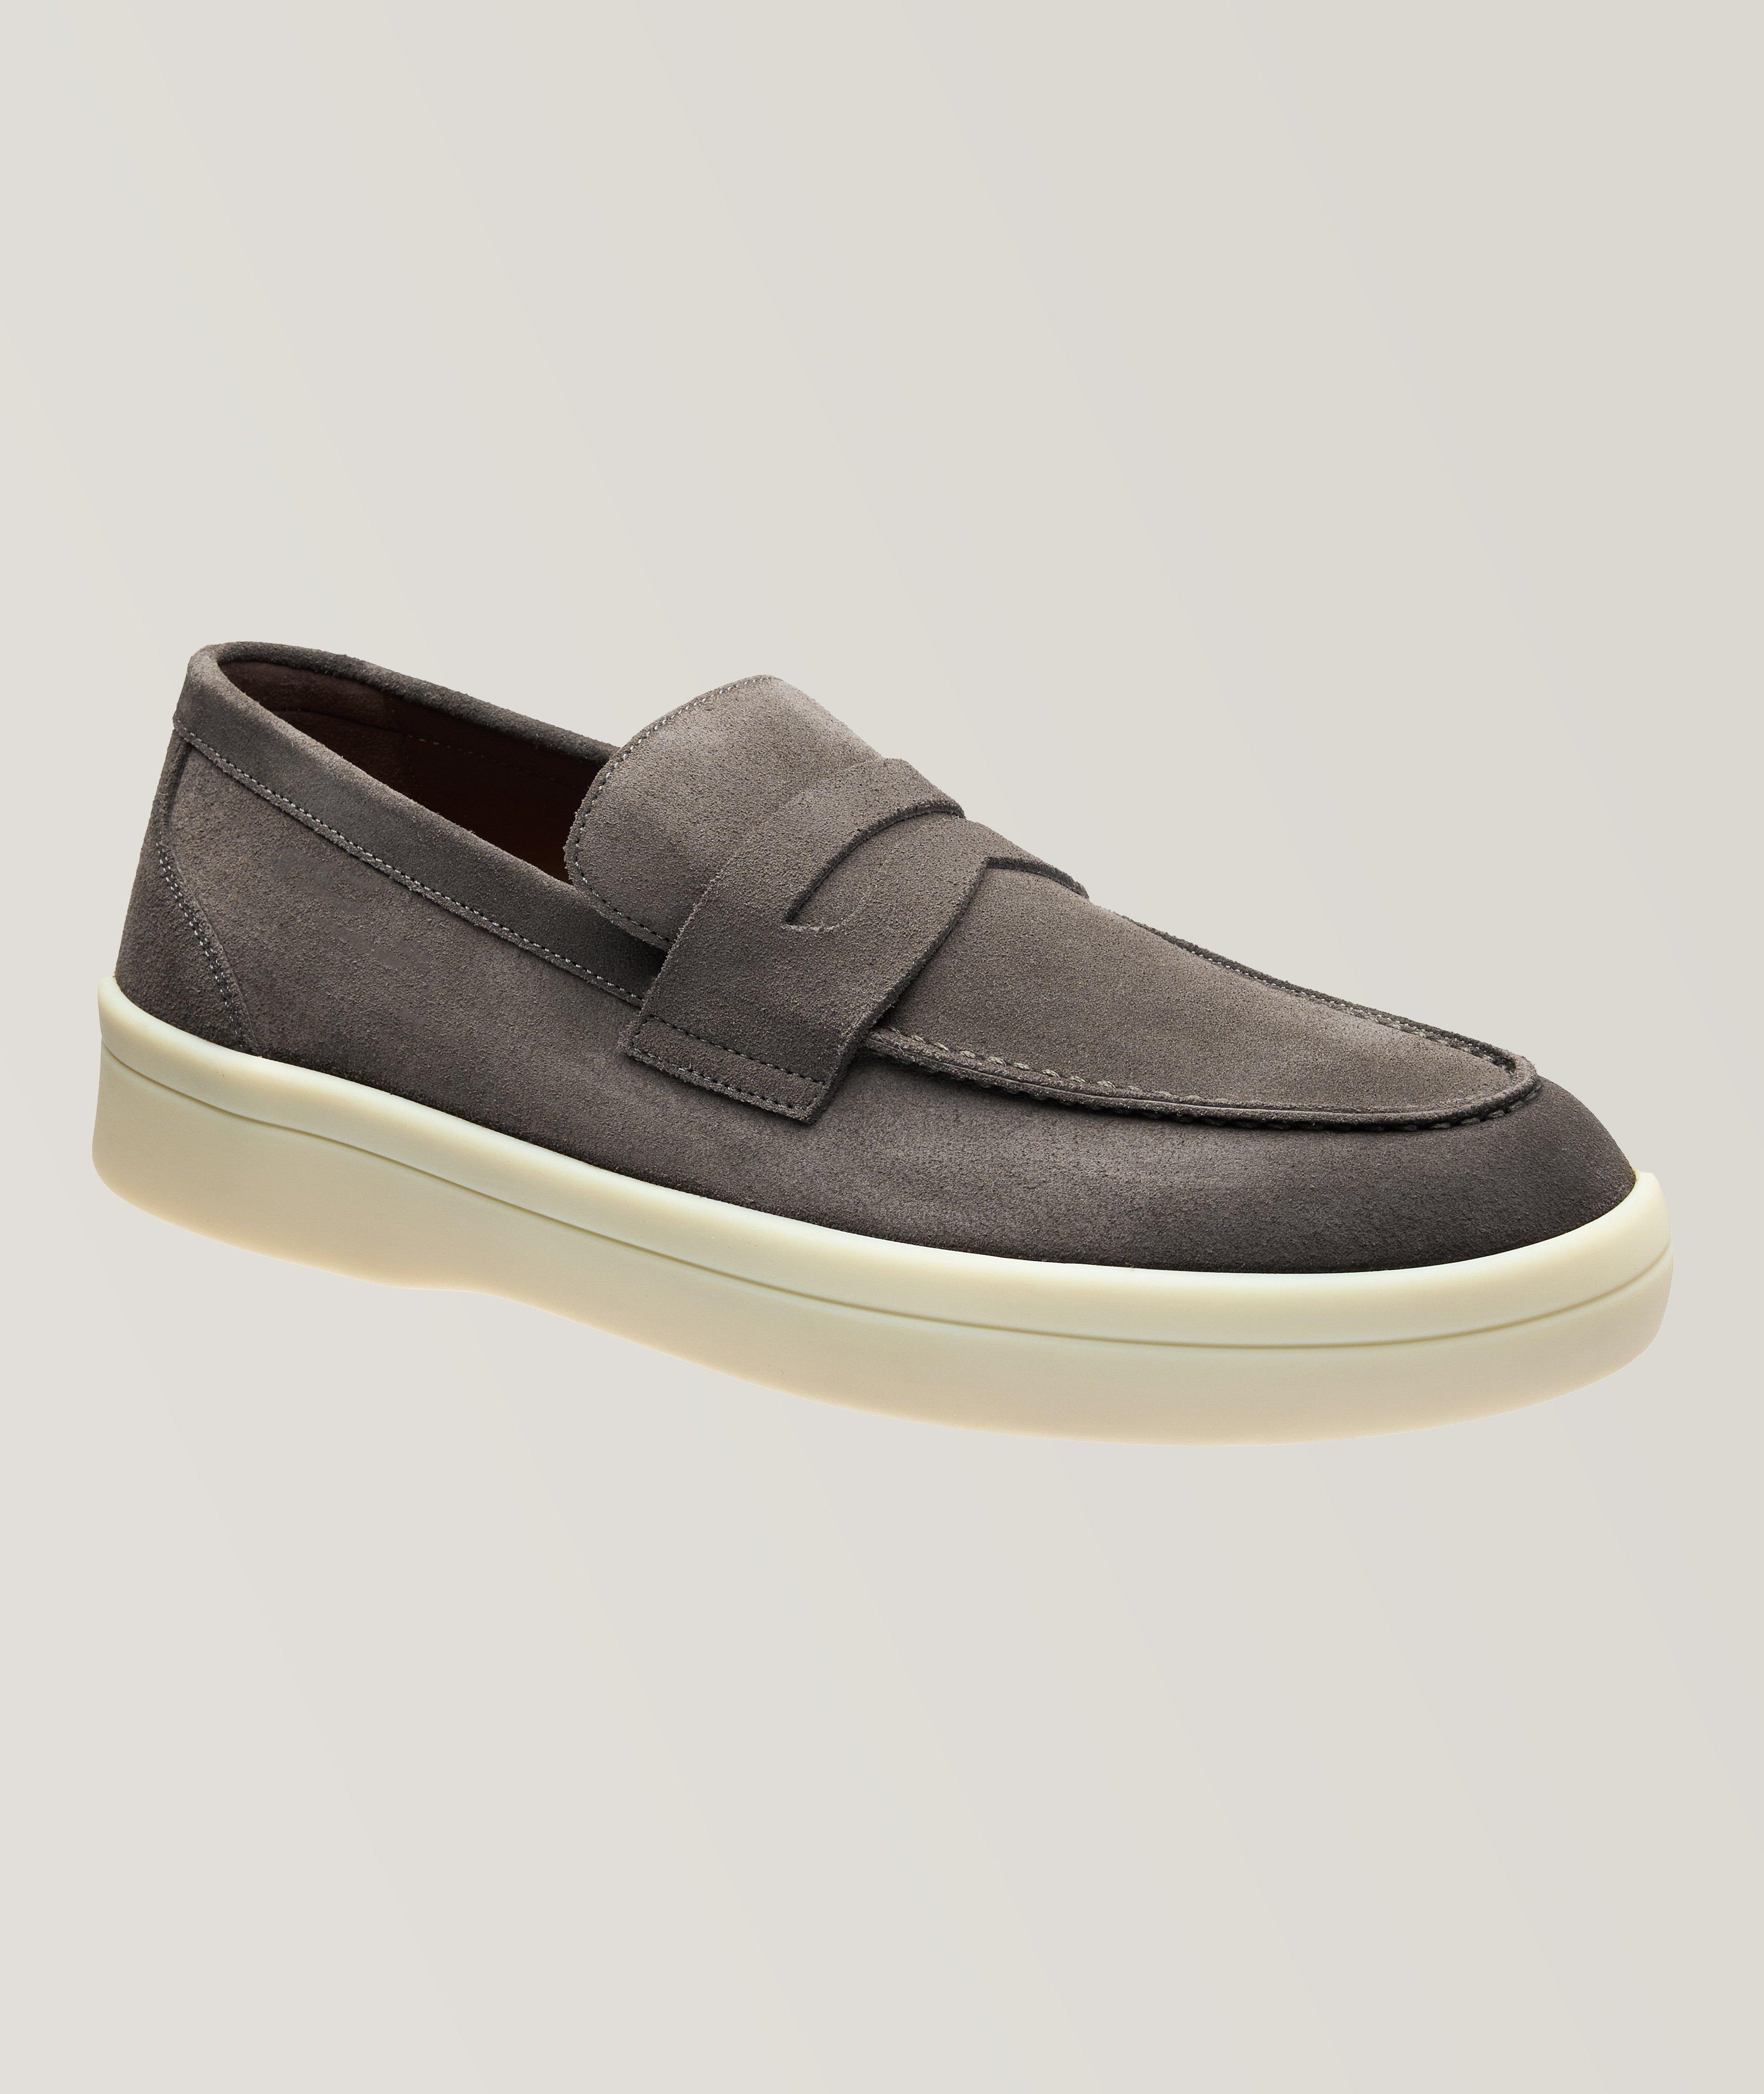 Ultimate Walk Suede Loafers image 0